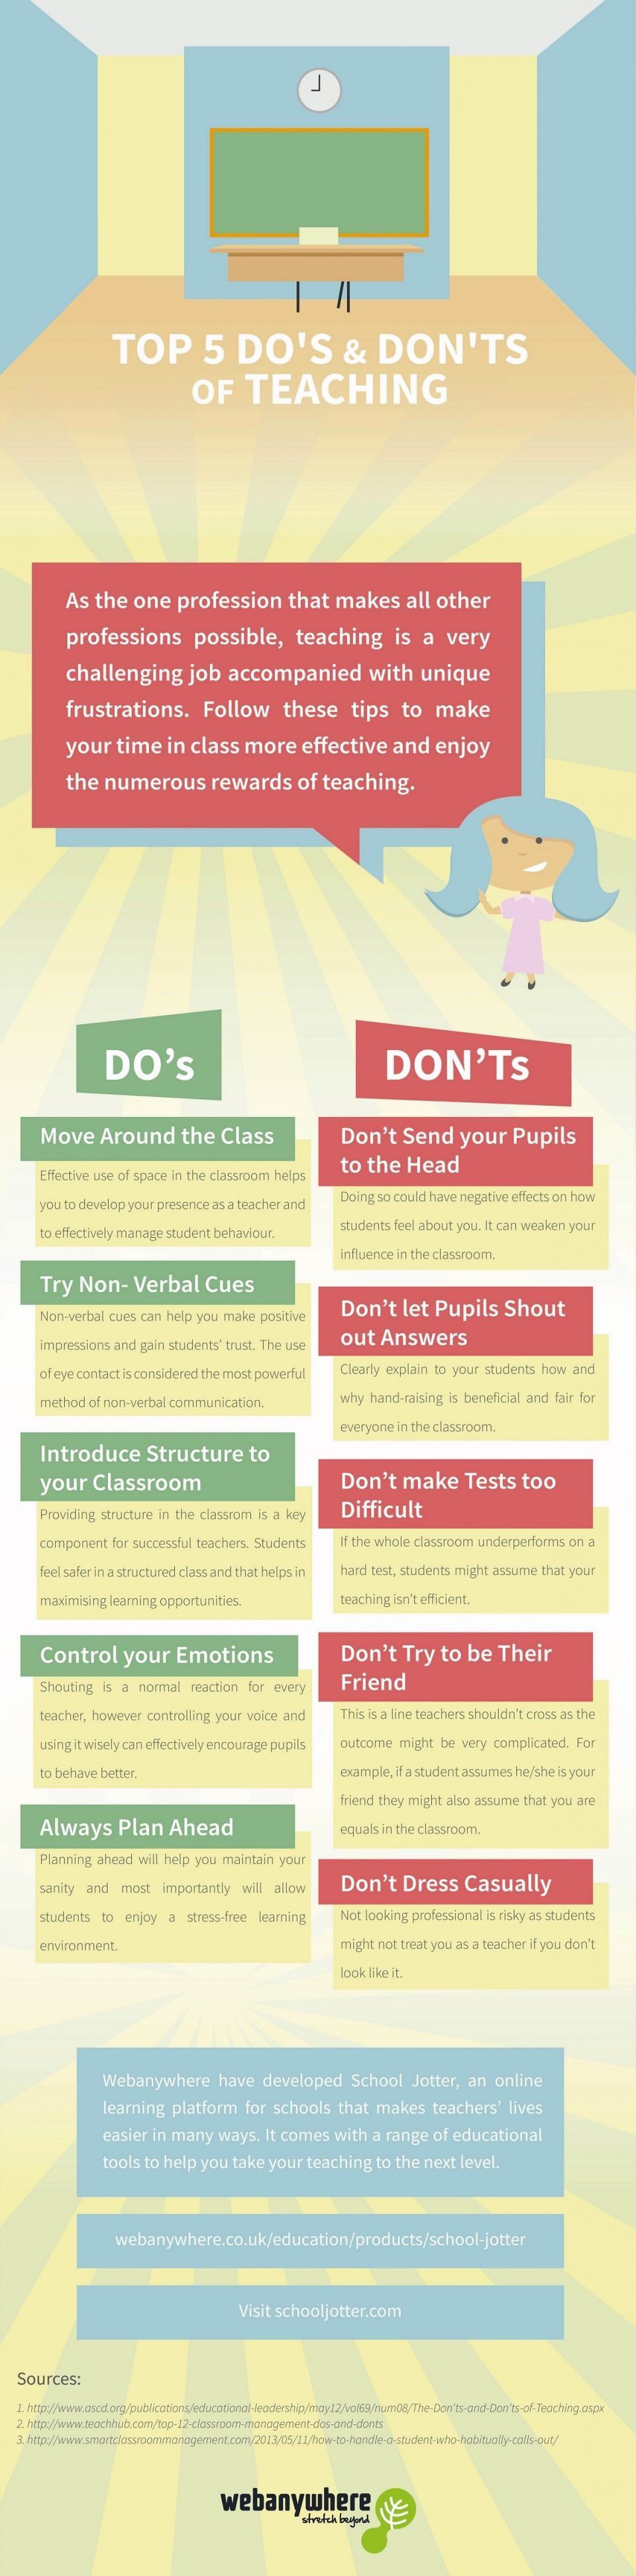 Top 5 Do’s & Don’ts of Teaching Infographic